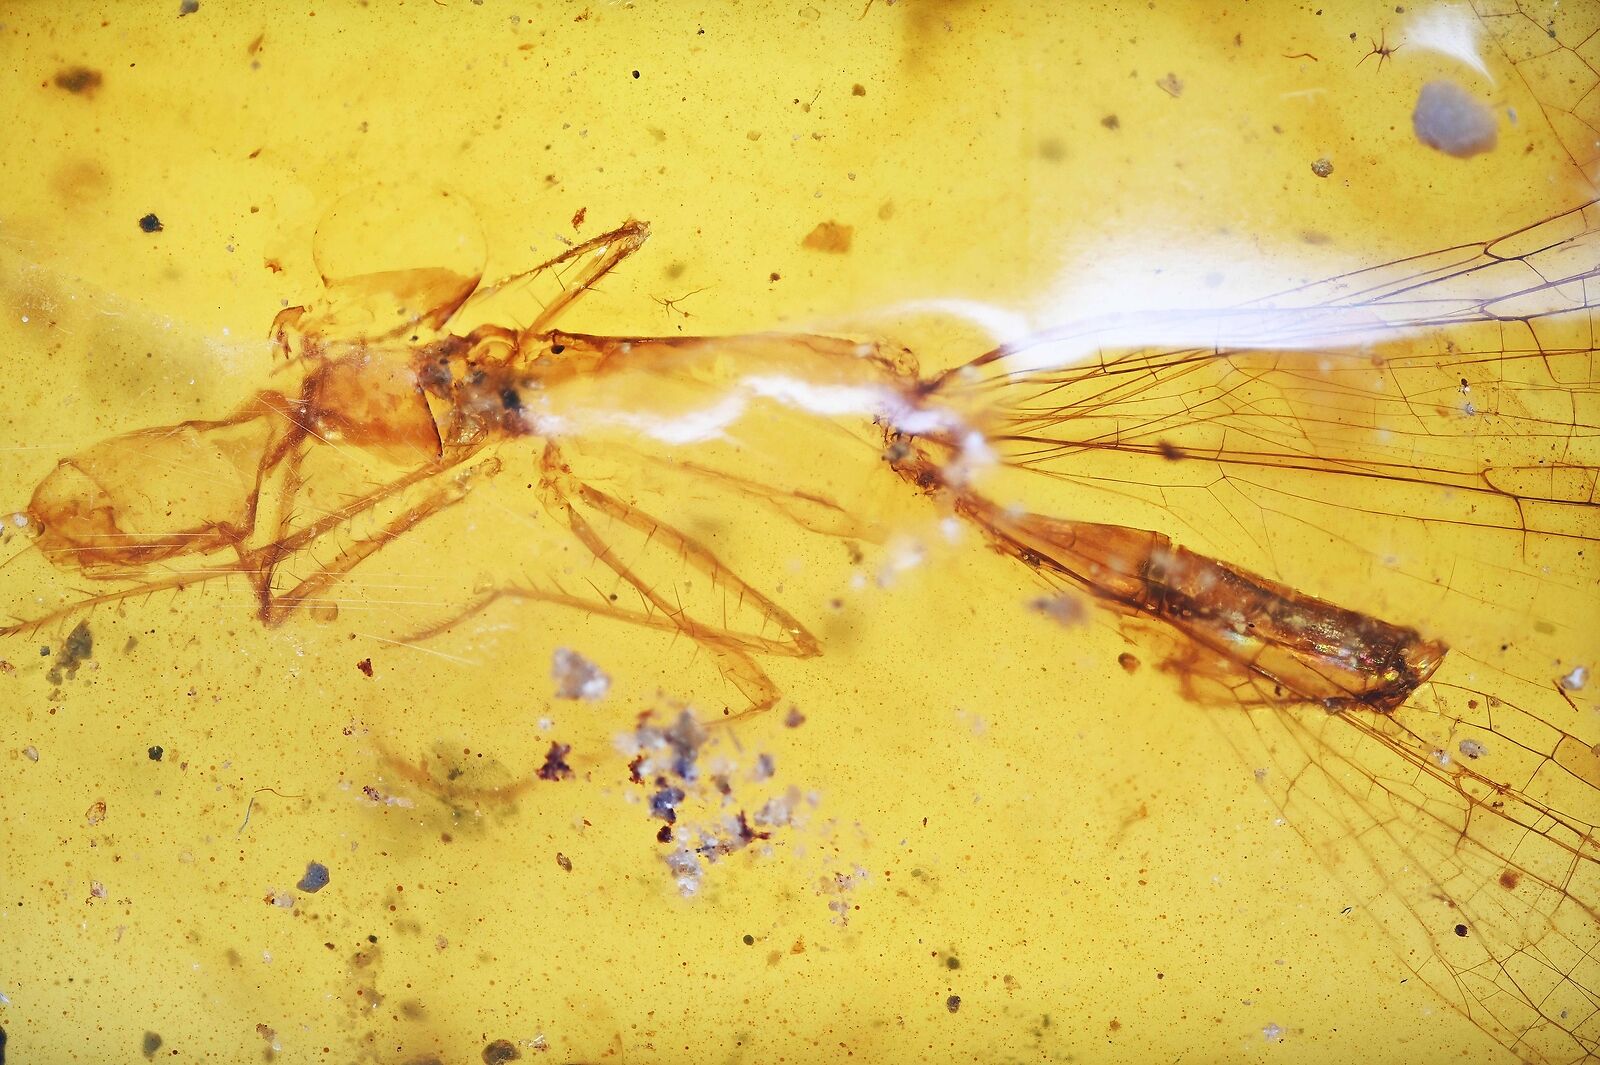 RARE Pair of Zygoptera (Damselfly), Fossil inclusion in Burmese Amber